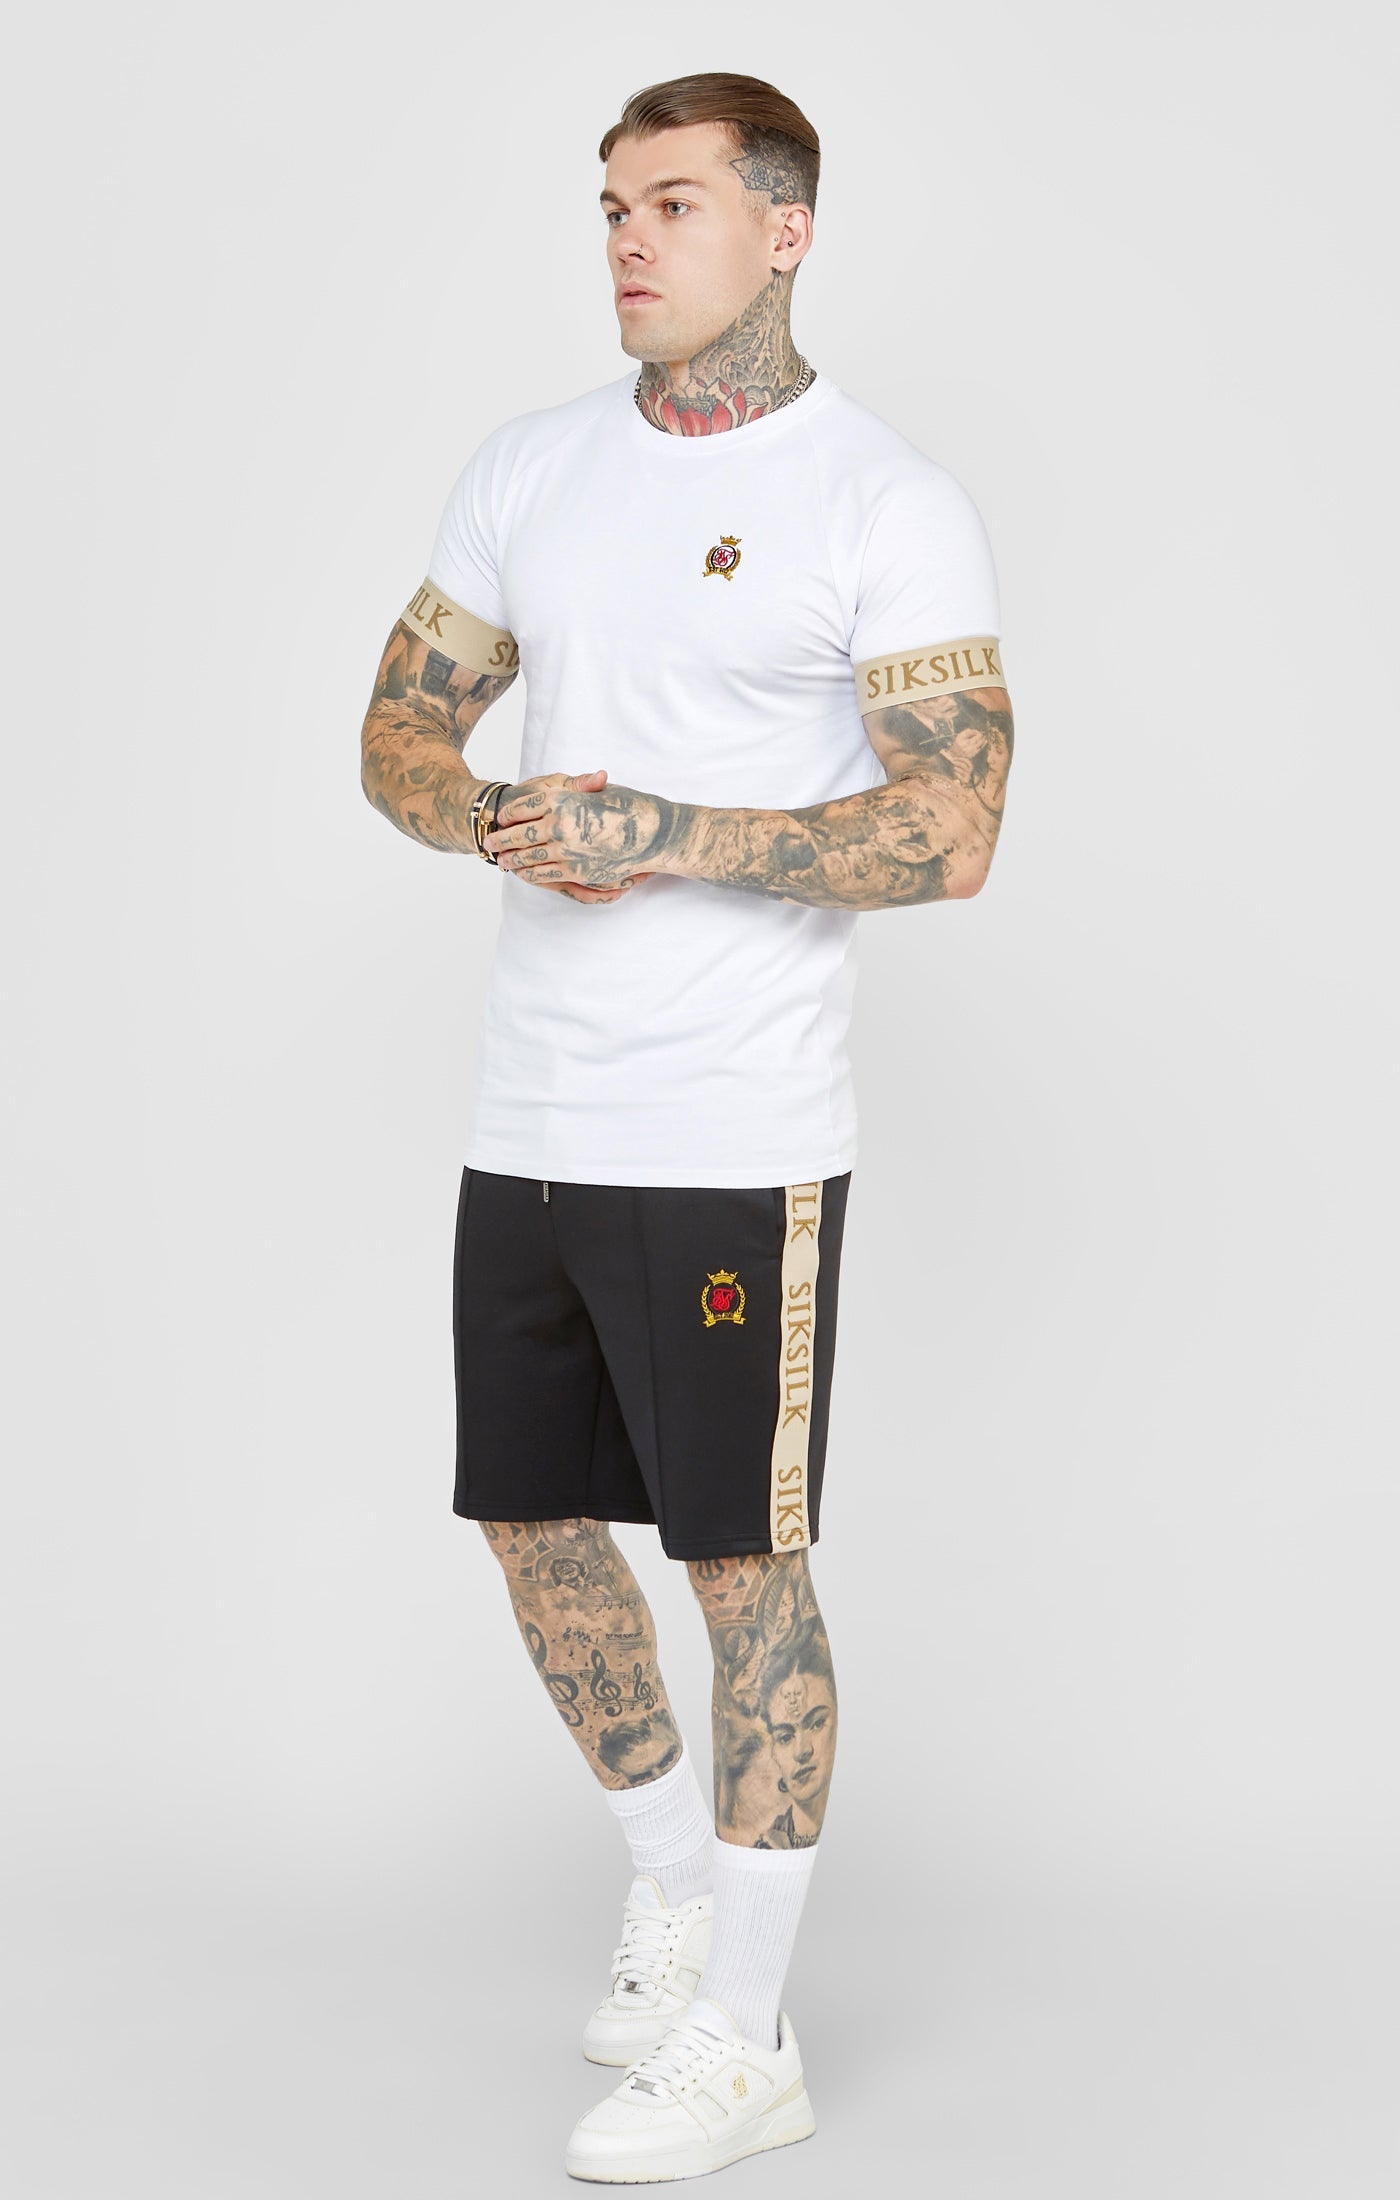 Crest Elasticated Cuff T-Shirt in White T-Shirts SikSilk   